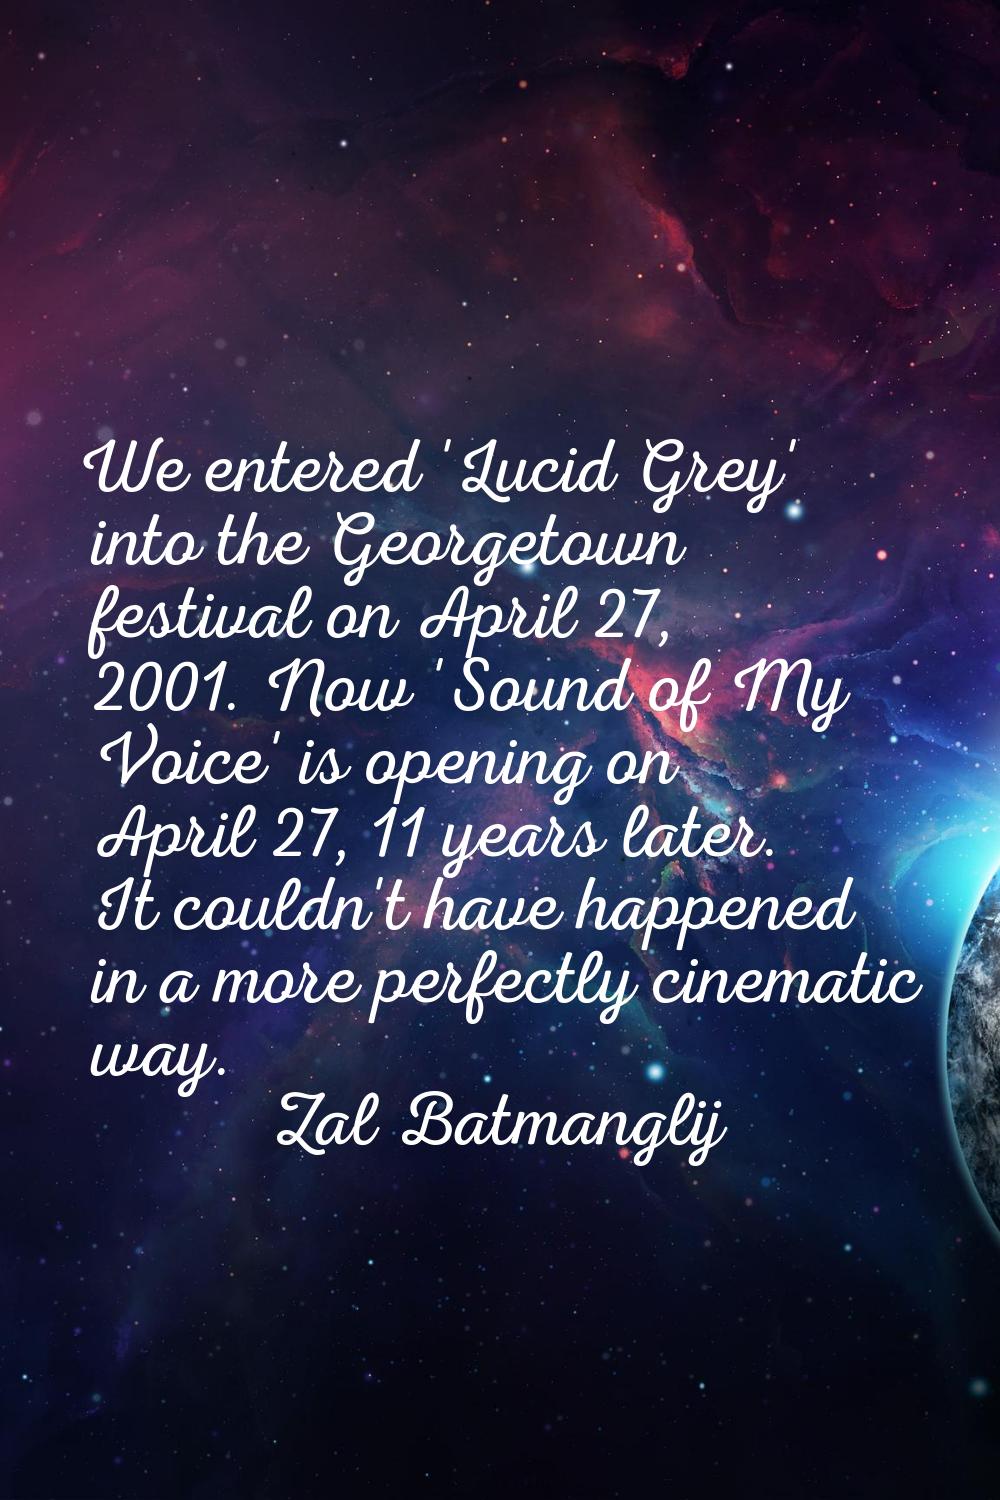 We entered 'Lucid Grey' into the Georgetown festival on April 27, 2001. Now 'Sound of My Voice' is 